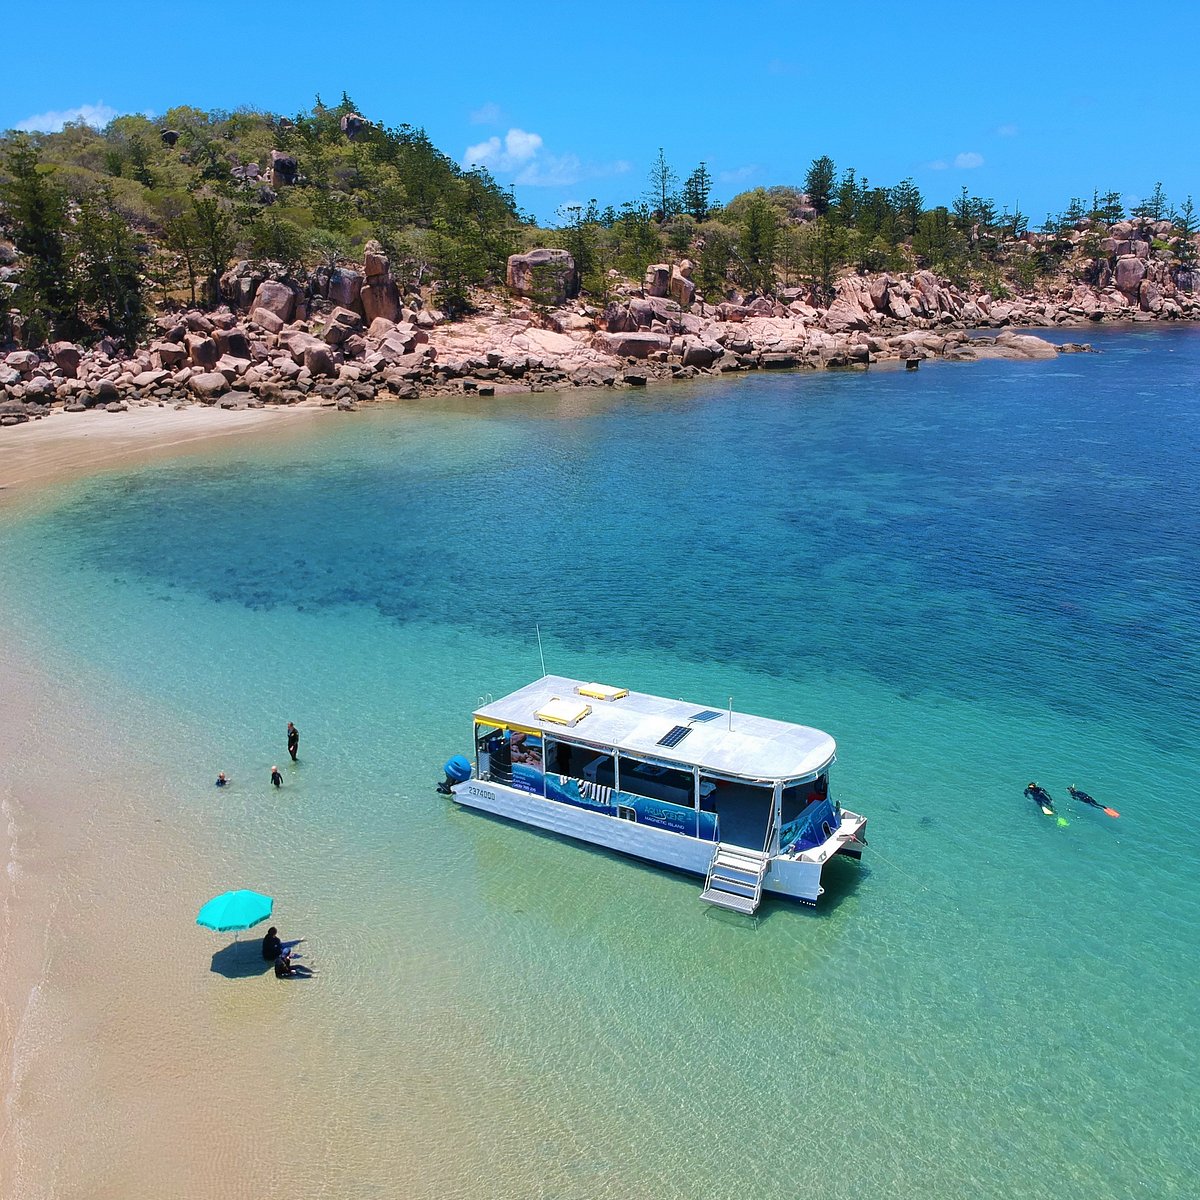 Aquascene Magnetic Island - All You Need to Know Go